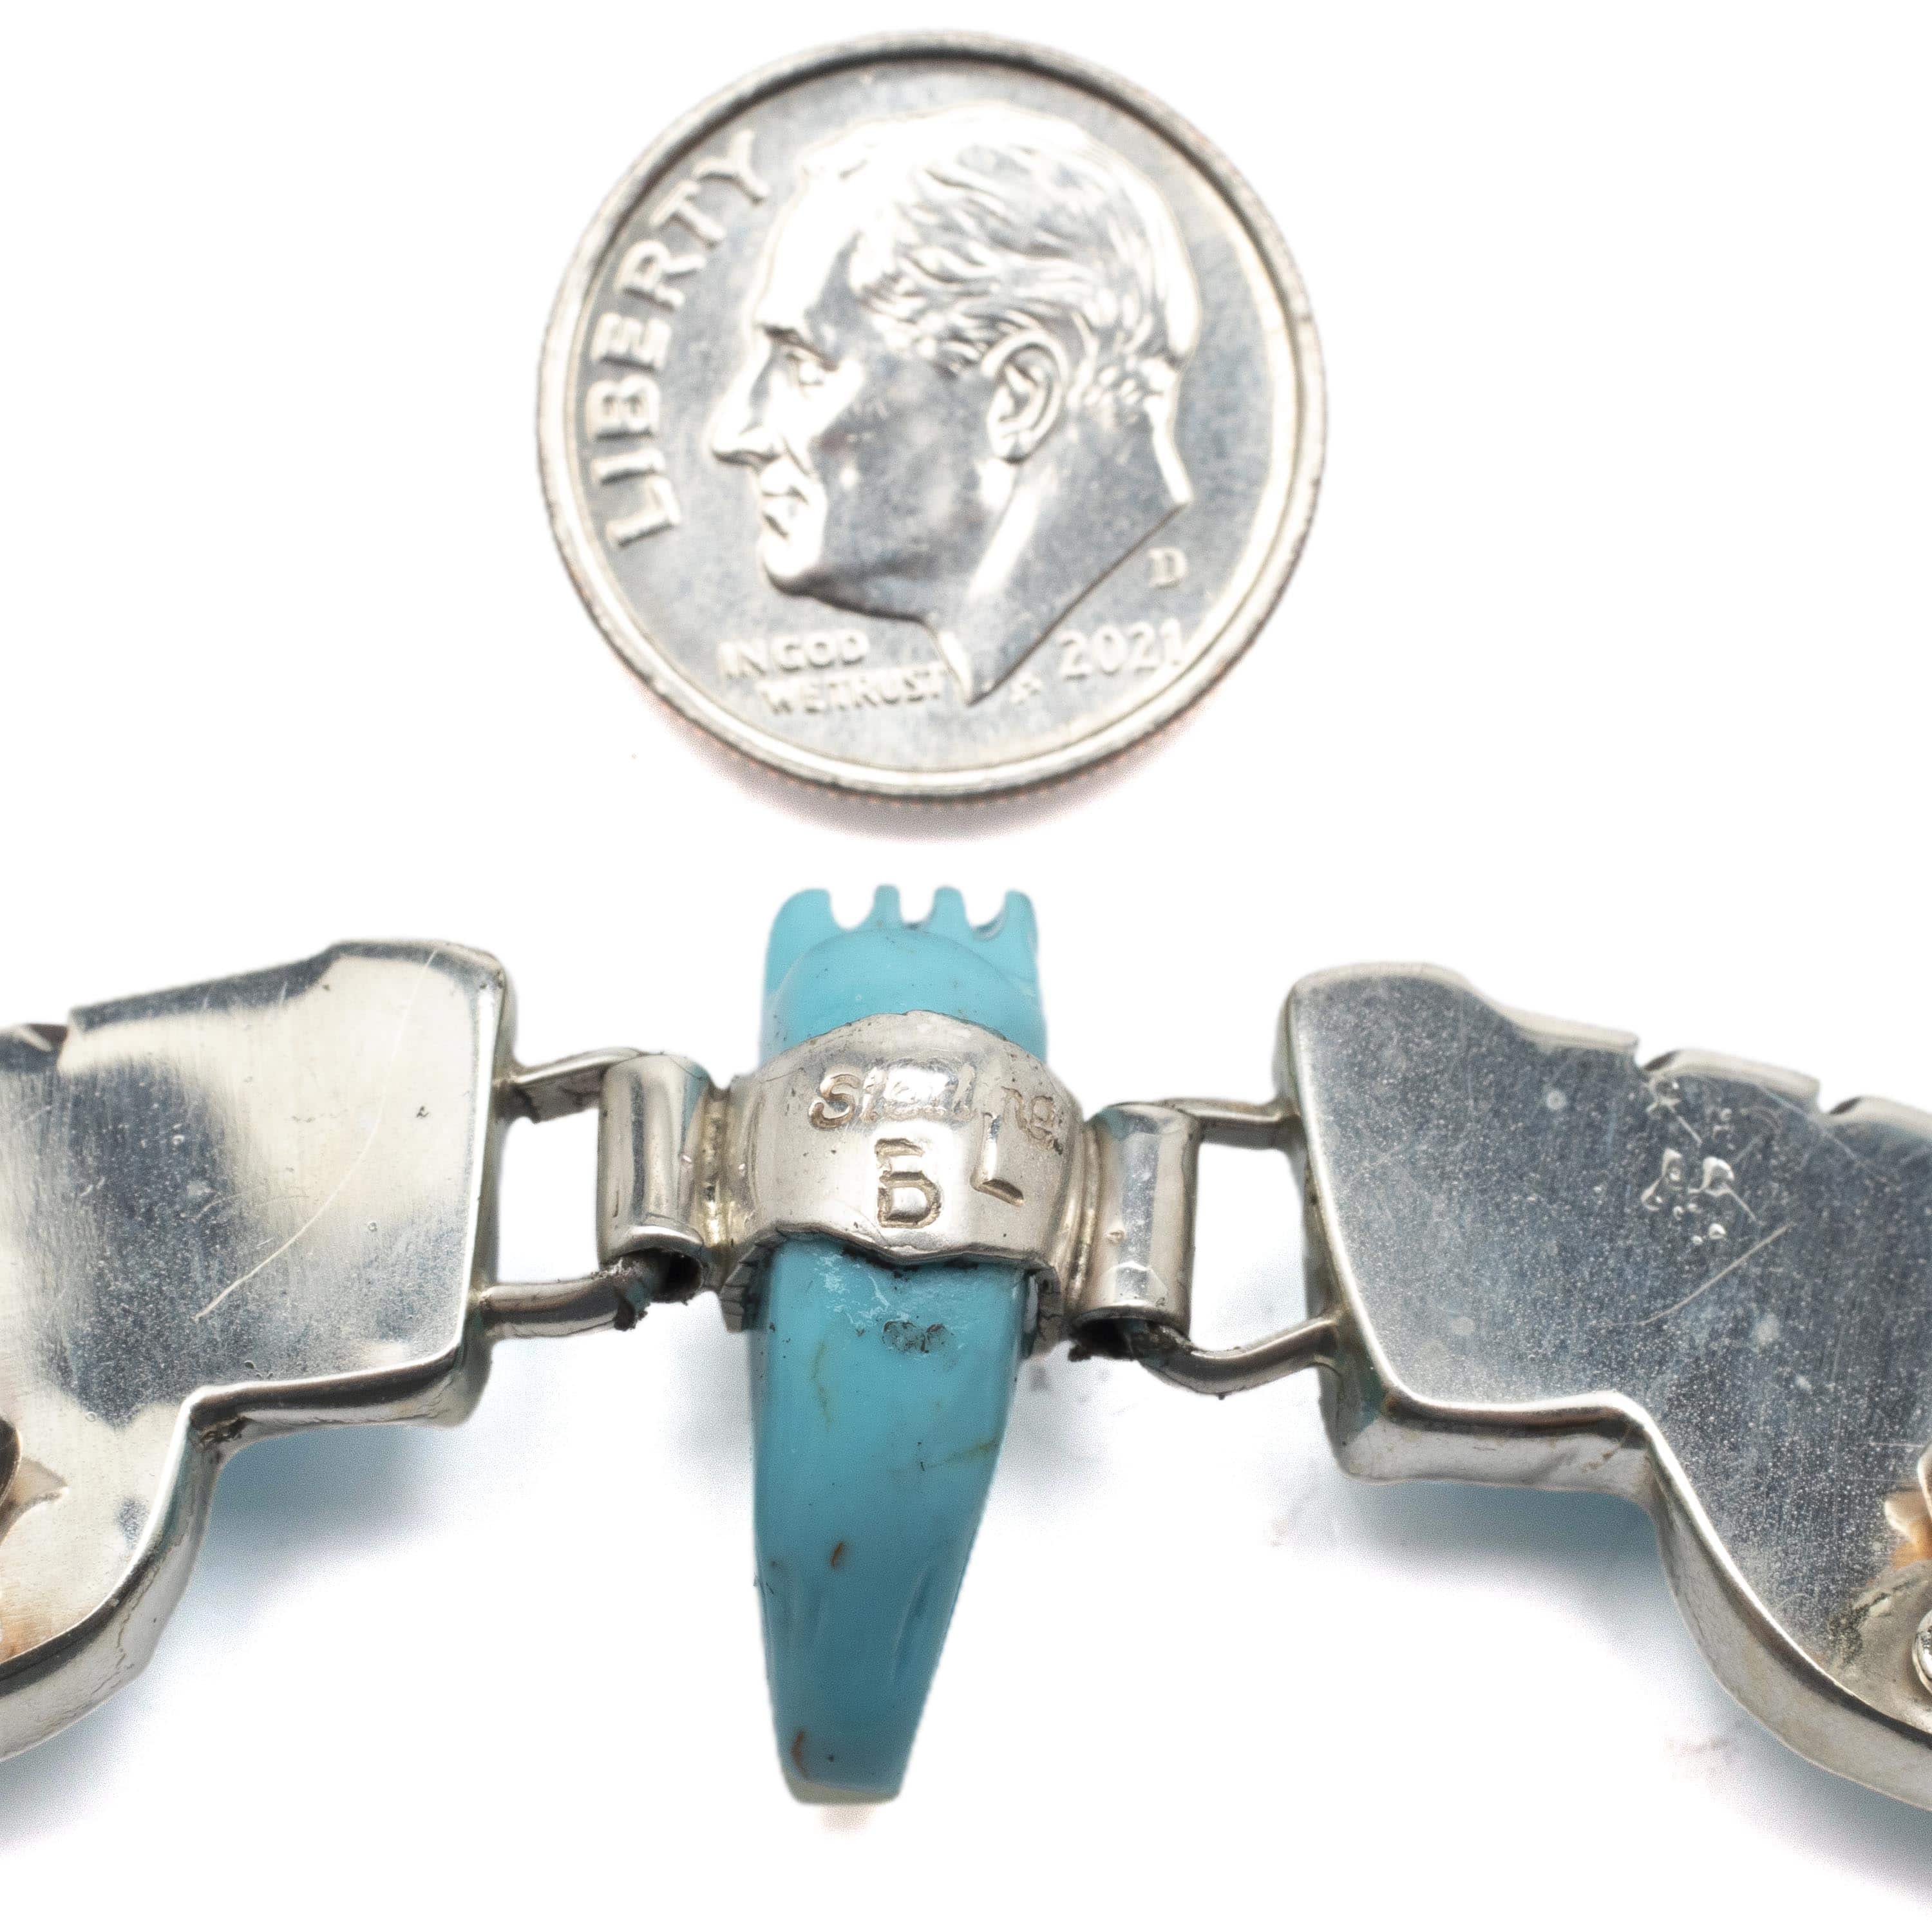 Kalifano Native American Jewelry Ben Livingston Turquoise Eagle USA Native American Made 925 Sterling Silver Necklace NAN500.004